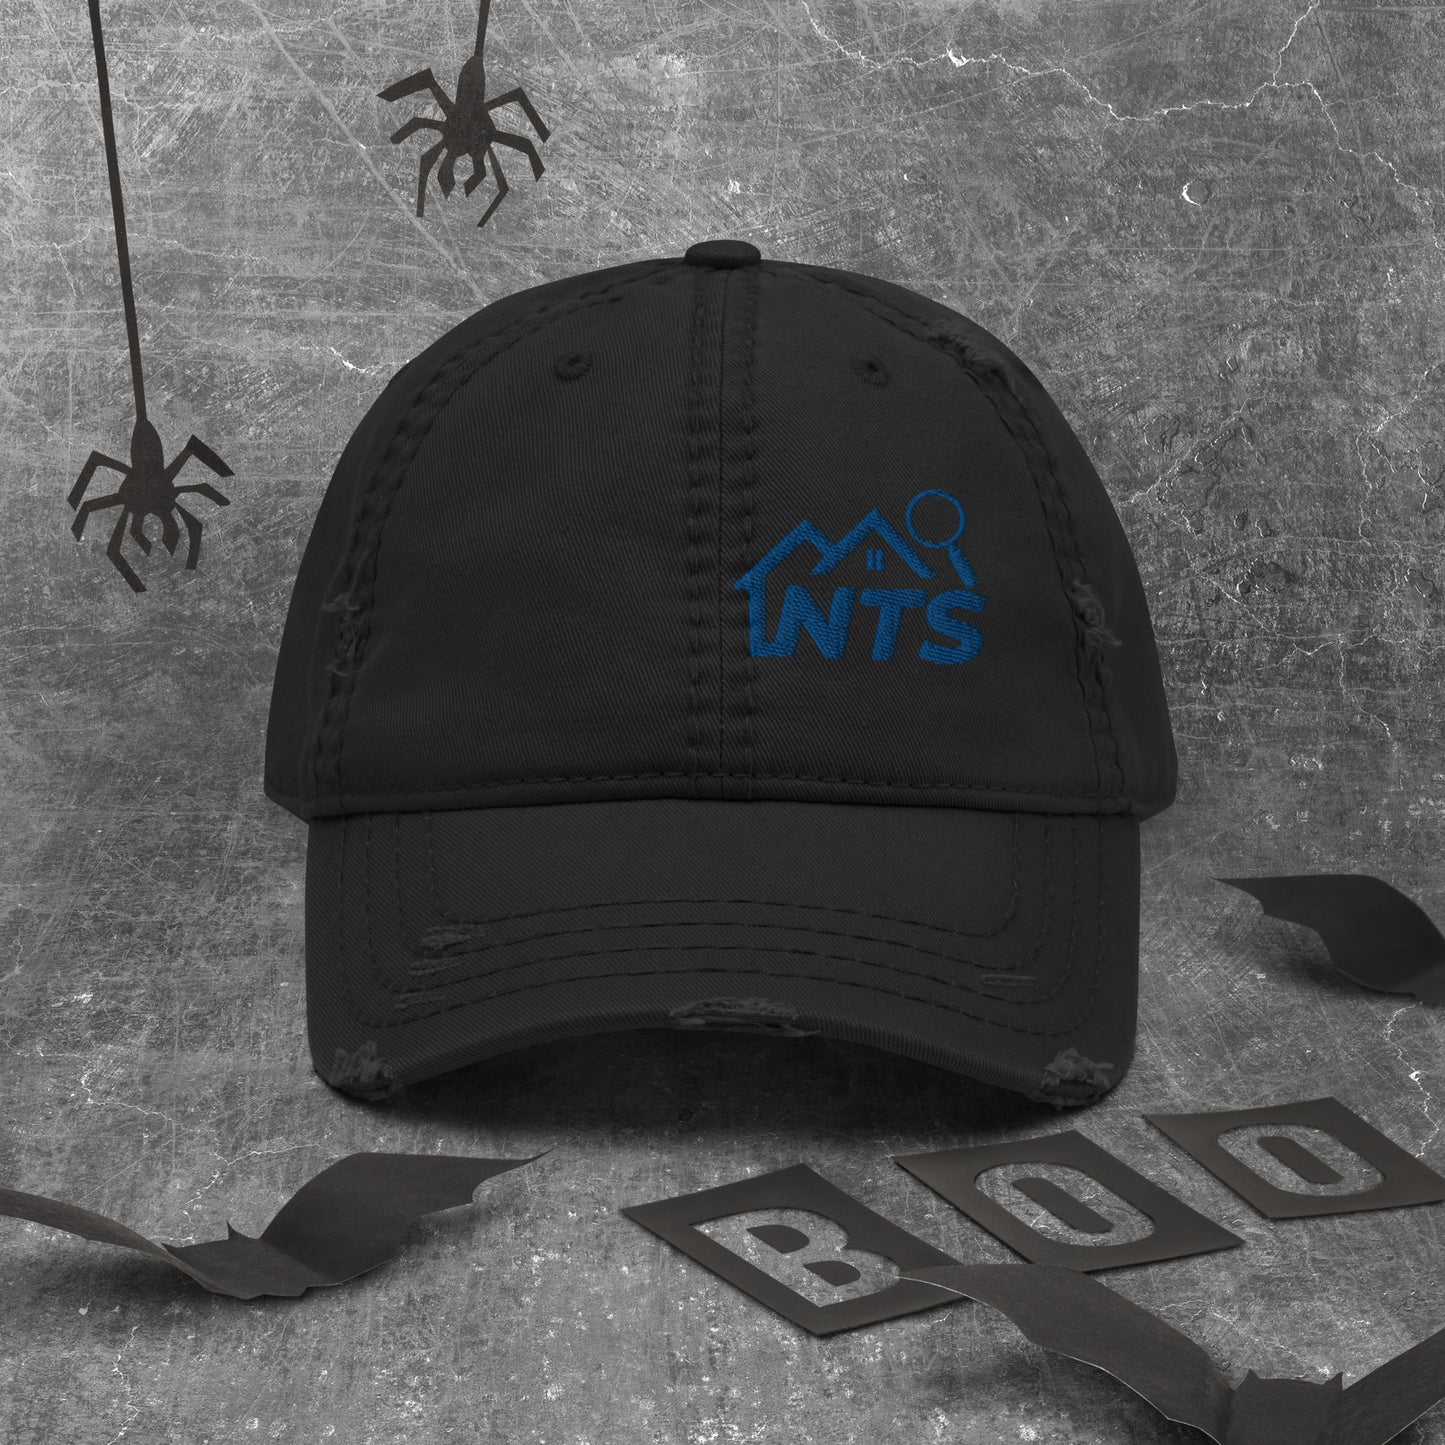 NTS Distressed Dad Hat Left